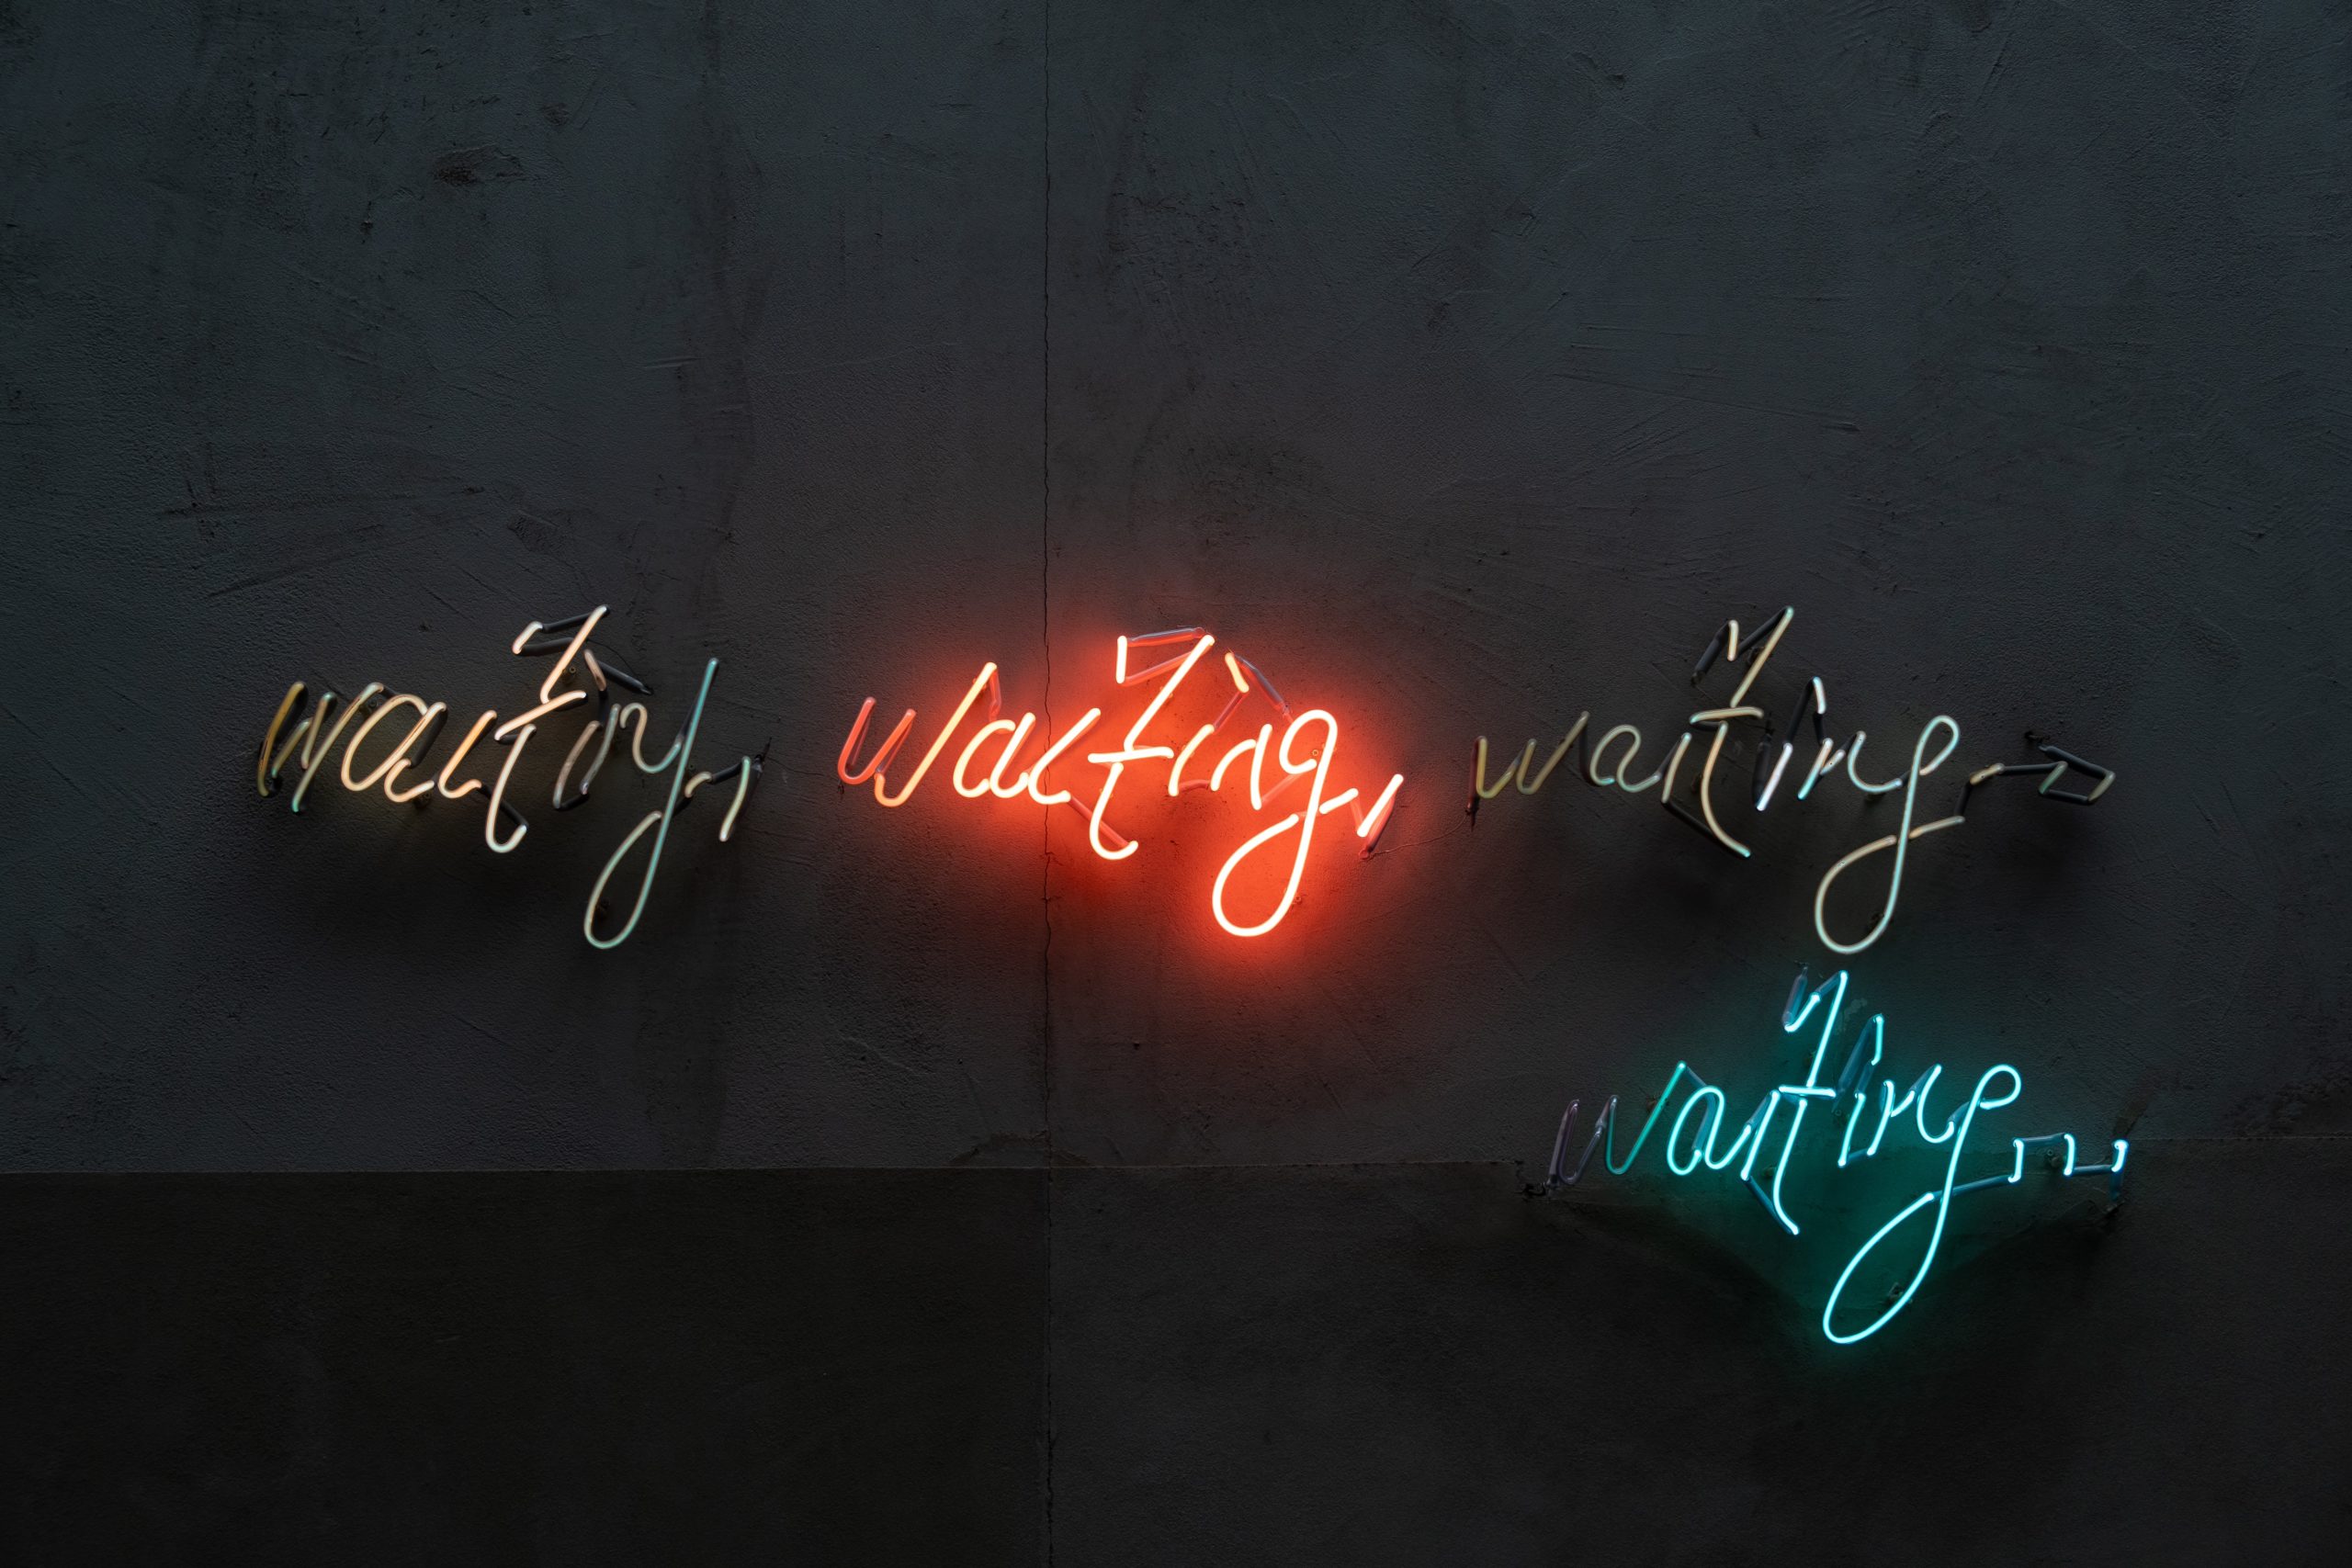 Neon writing on a gray wall spells out "Waiting, waiting, waiting, waiting..." in different colors of red, blue, and white